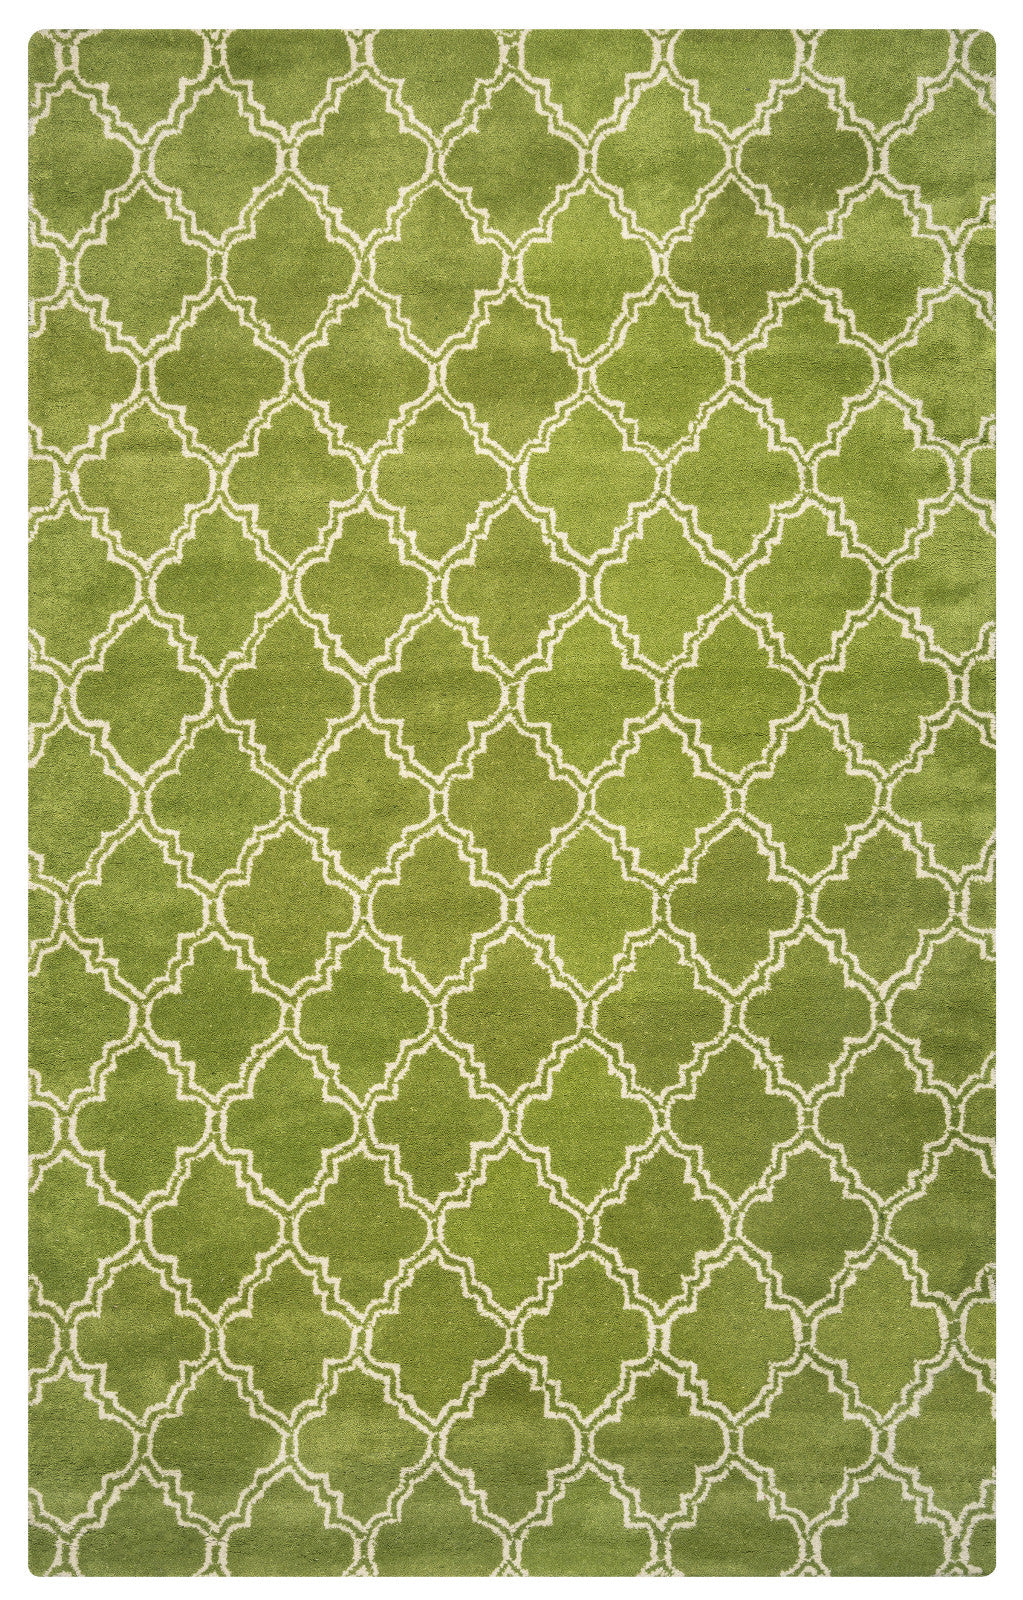 Rizzy Julian Pointe JP8745 Lime Green Area Rug